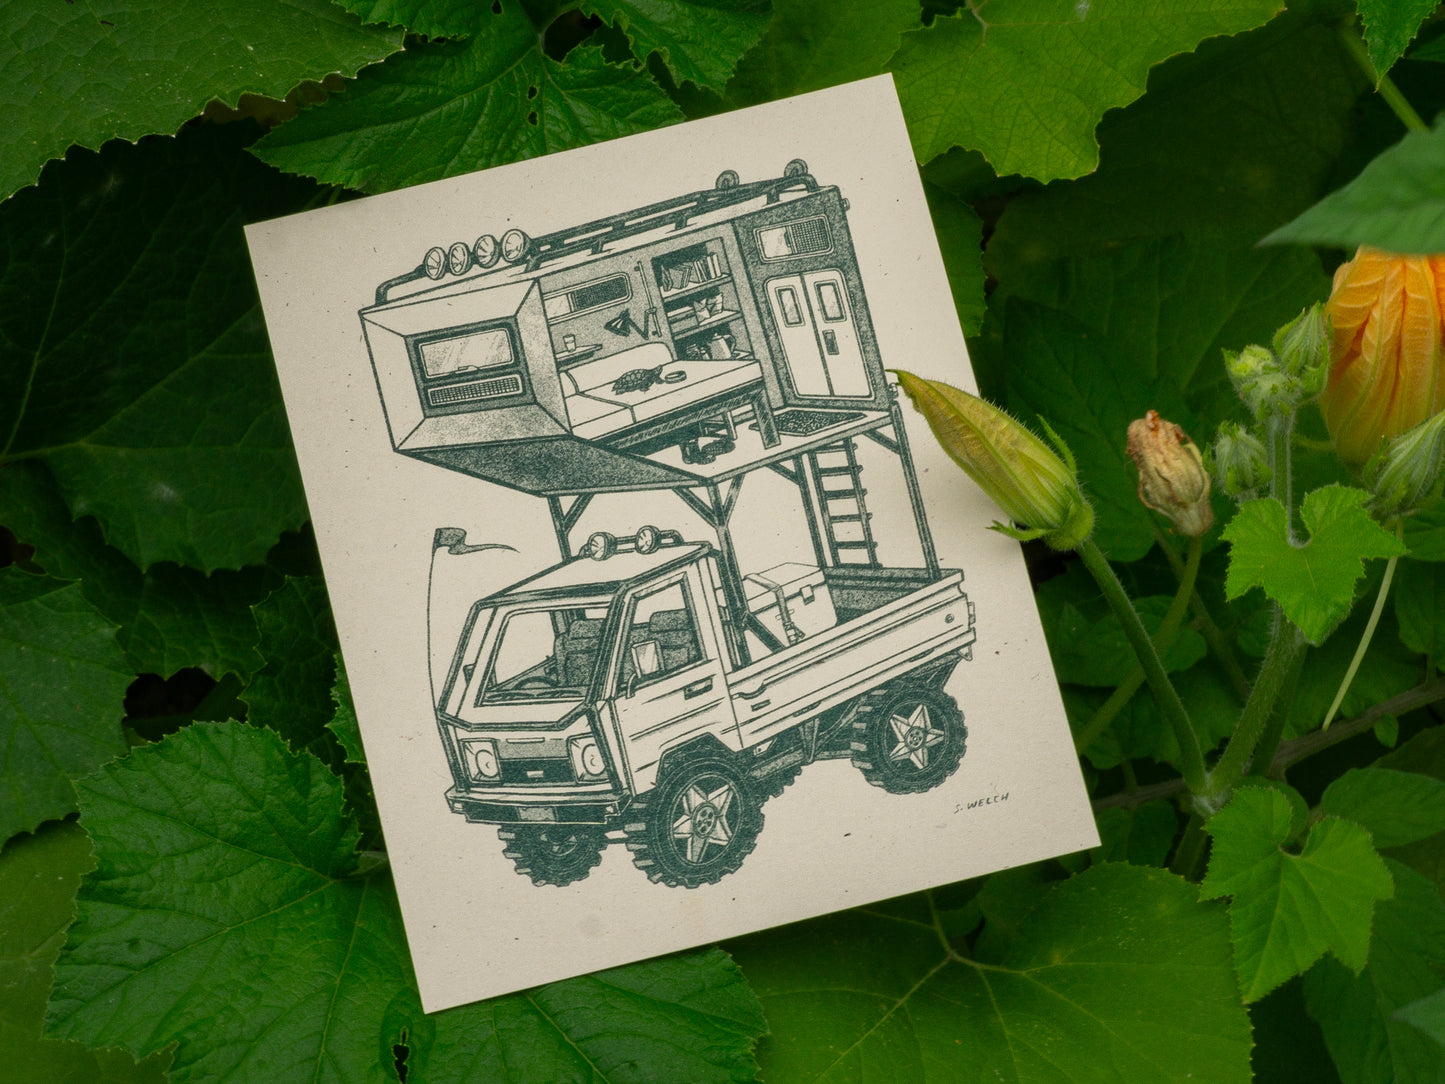 Kei truck art print in squash garden. The kei truck has an apartment on top of it.